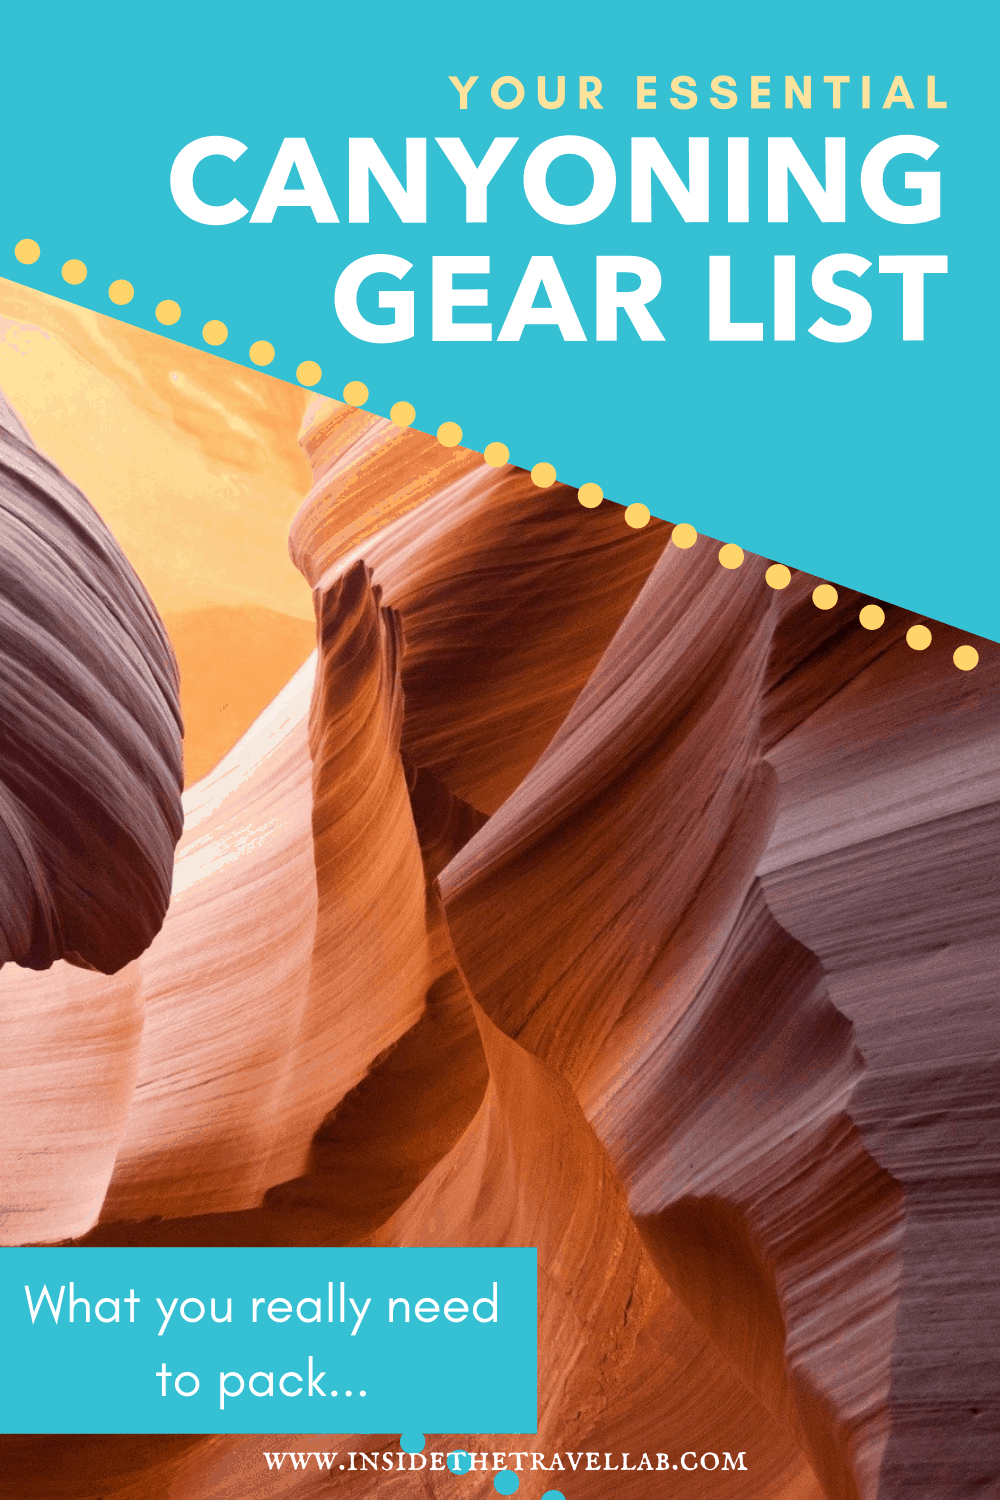 Essential canyoning gear list with canyoneering equipment guide